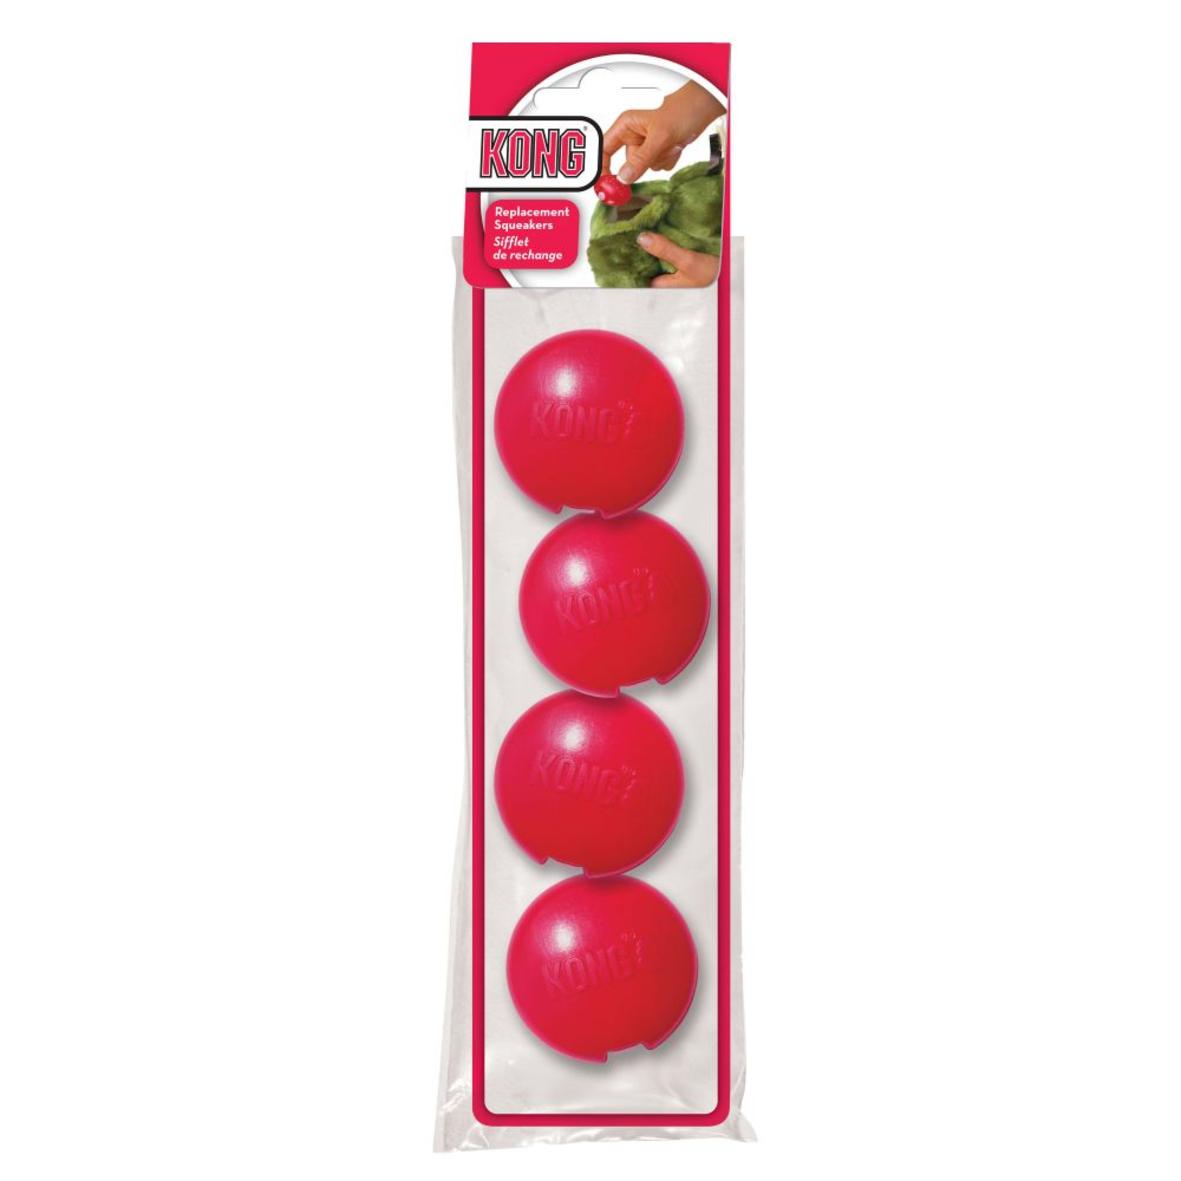 KONG Replacement Squeakers LARGE 4pkl